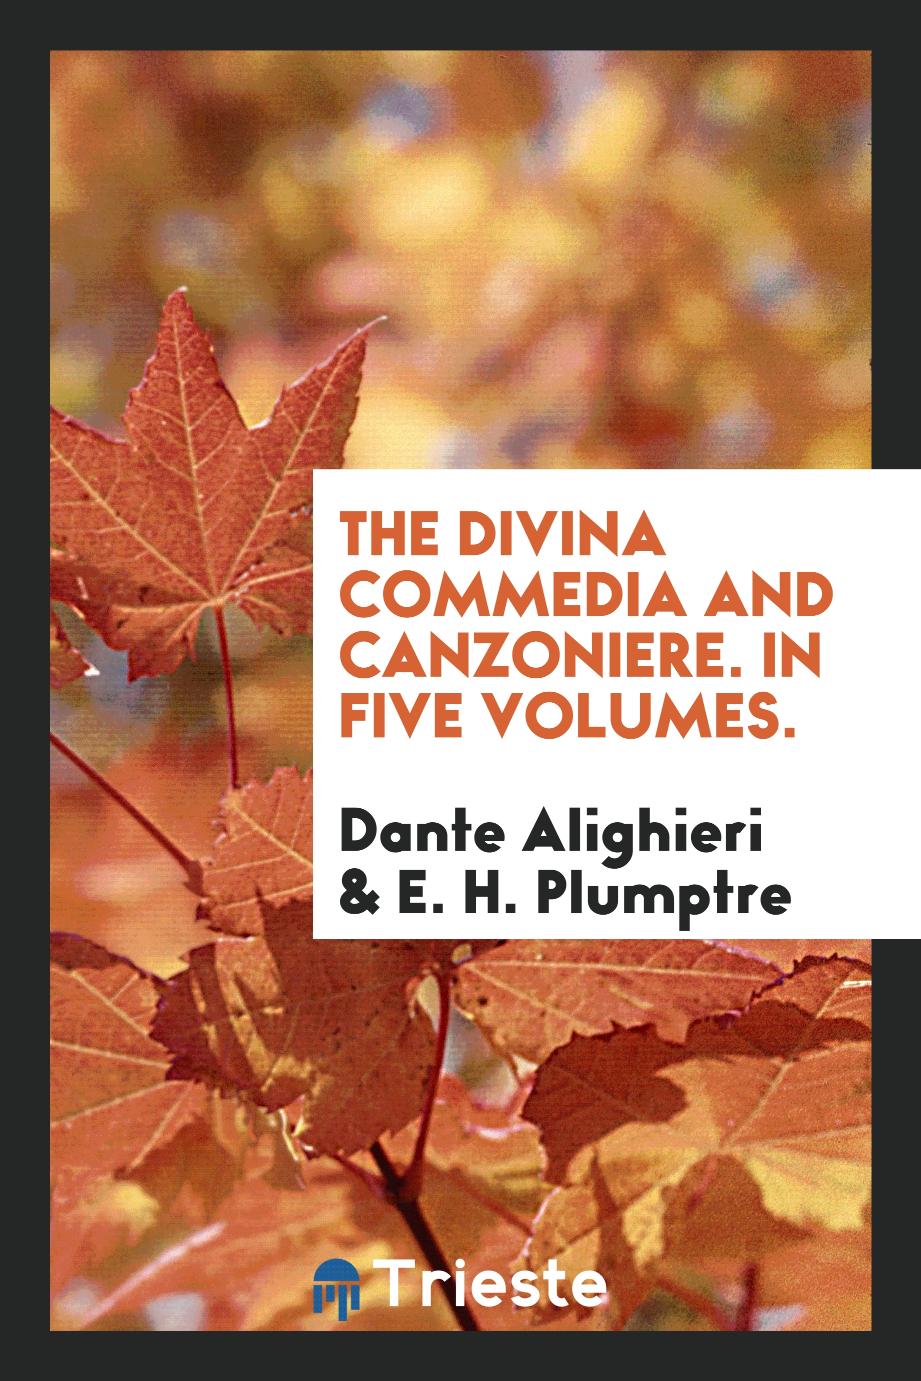 The Divina commedia and Canzoniere. In five volumes.